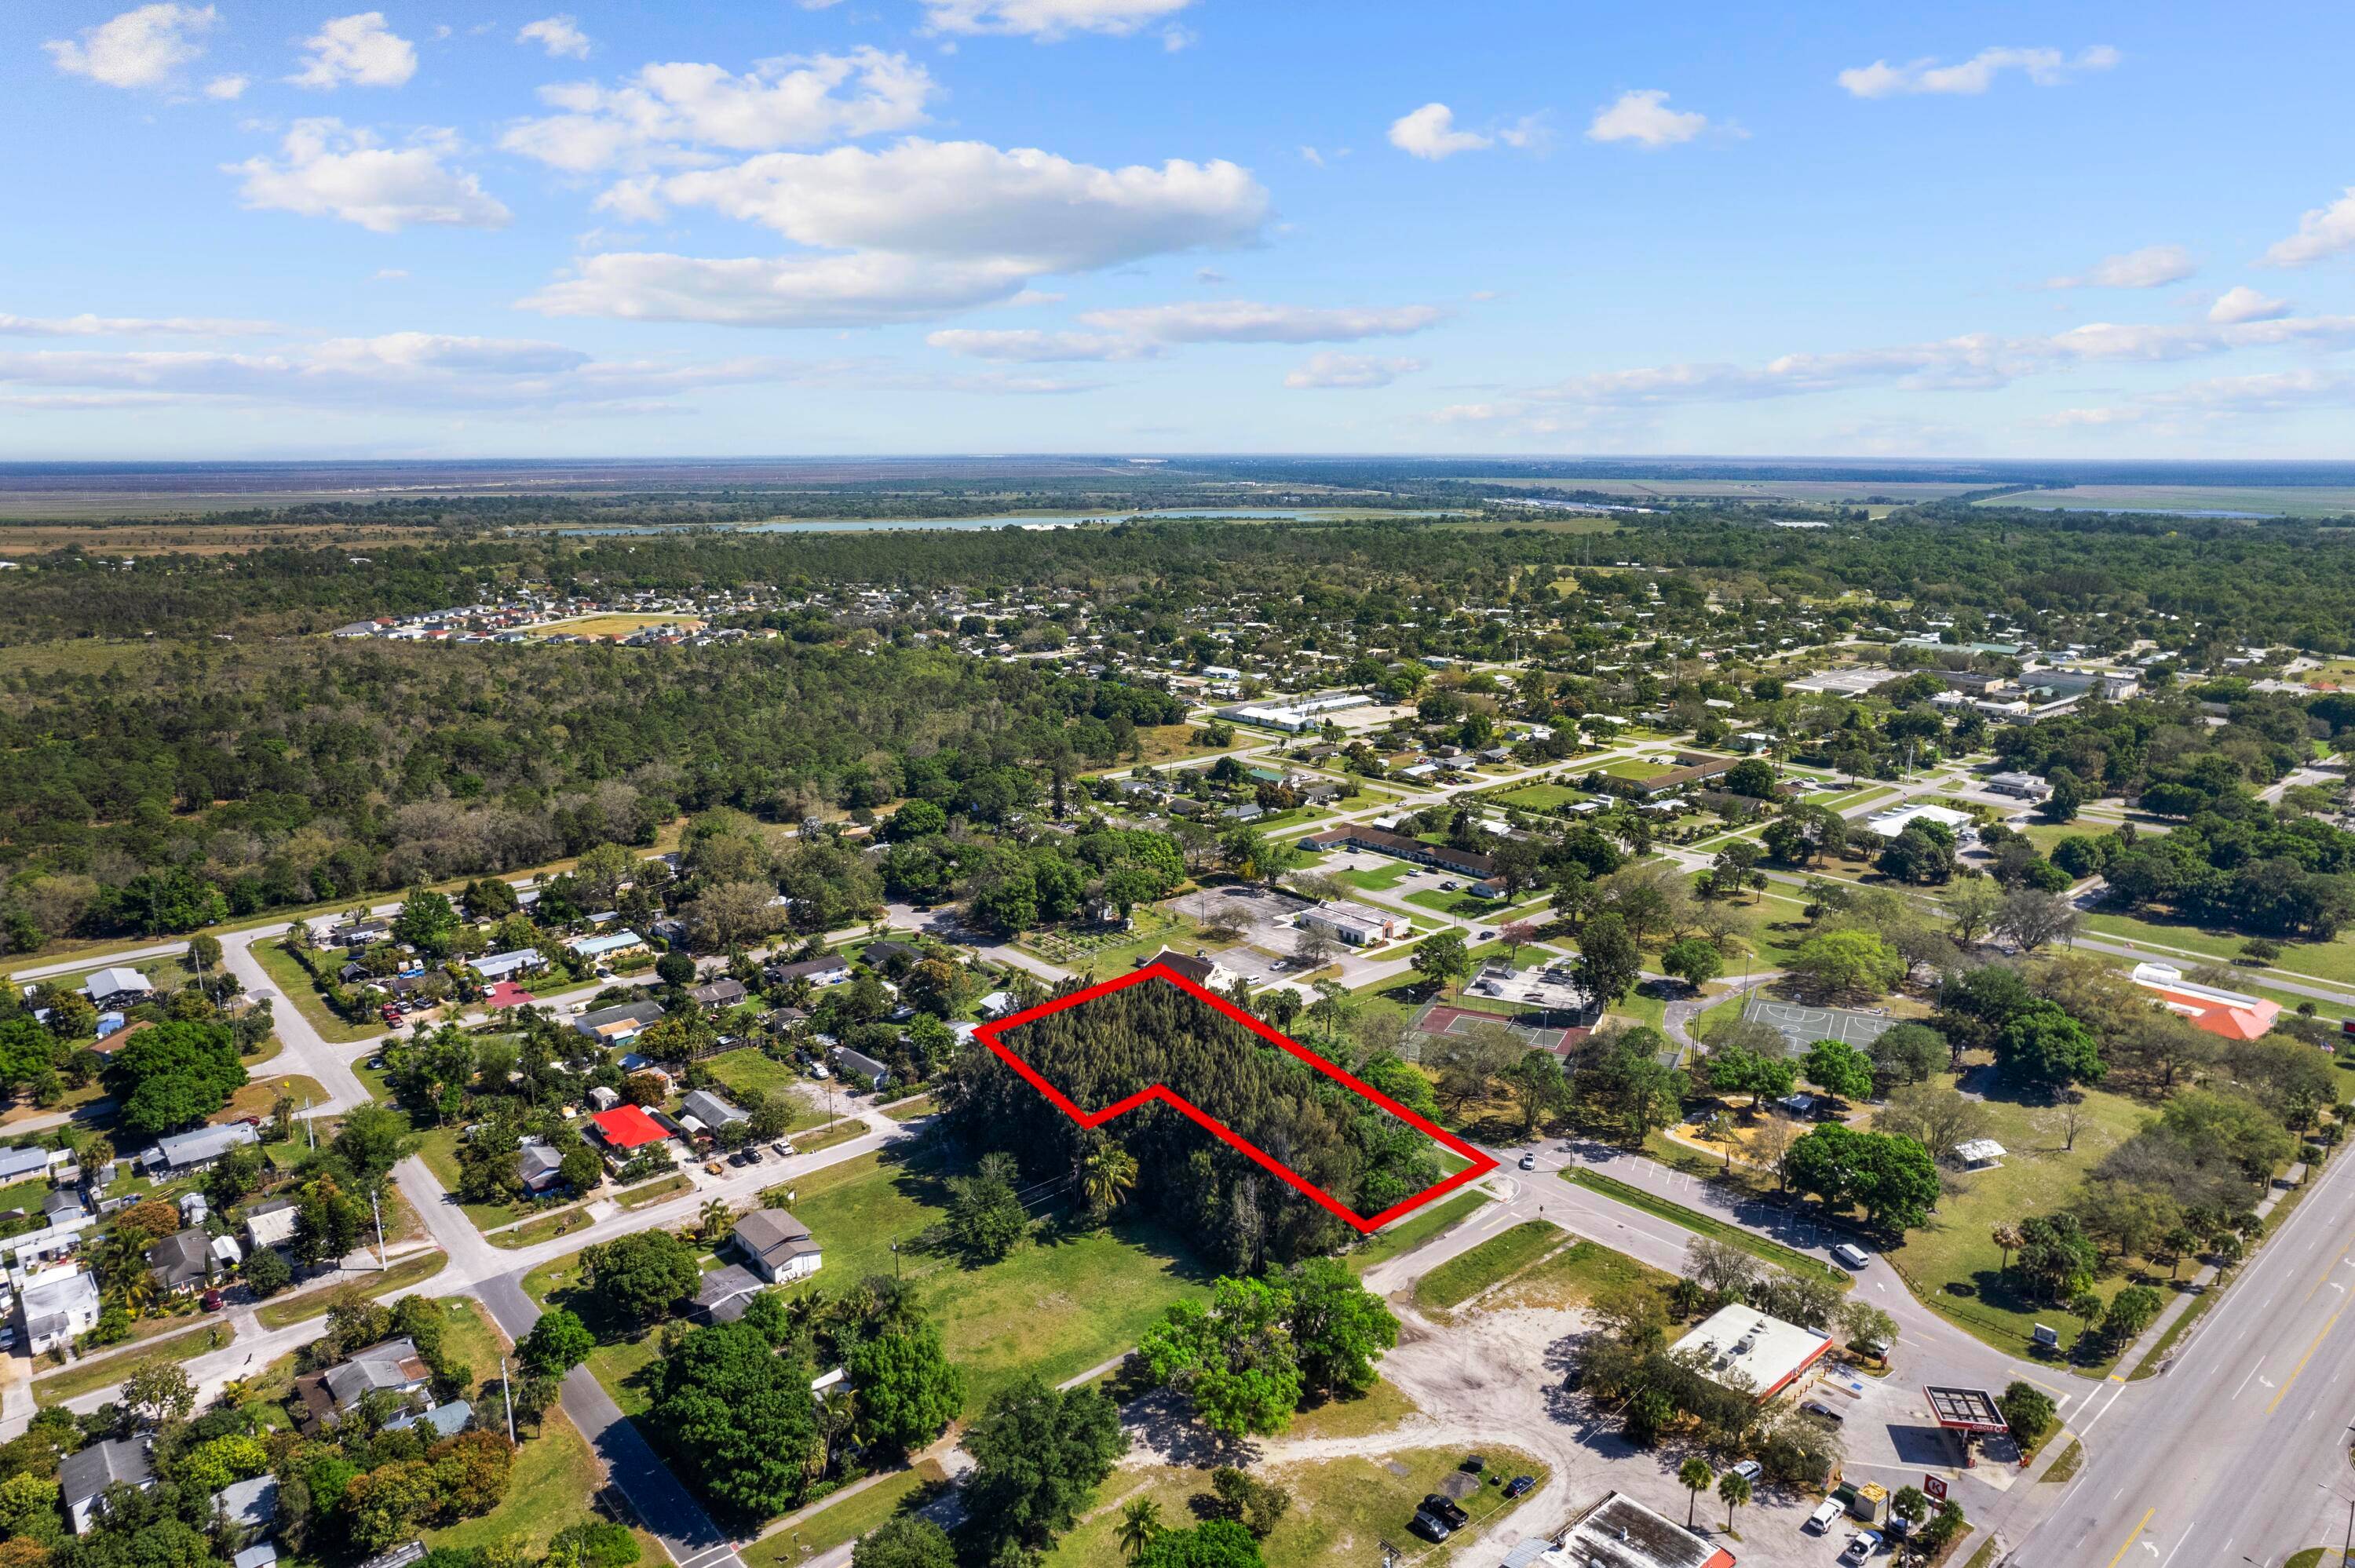 Commercial land in the heart of Indiantown.